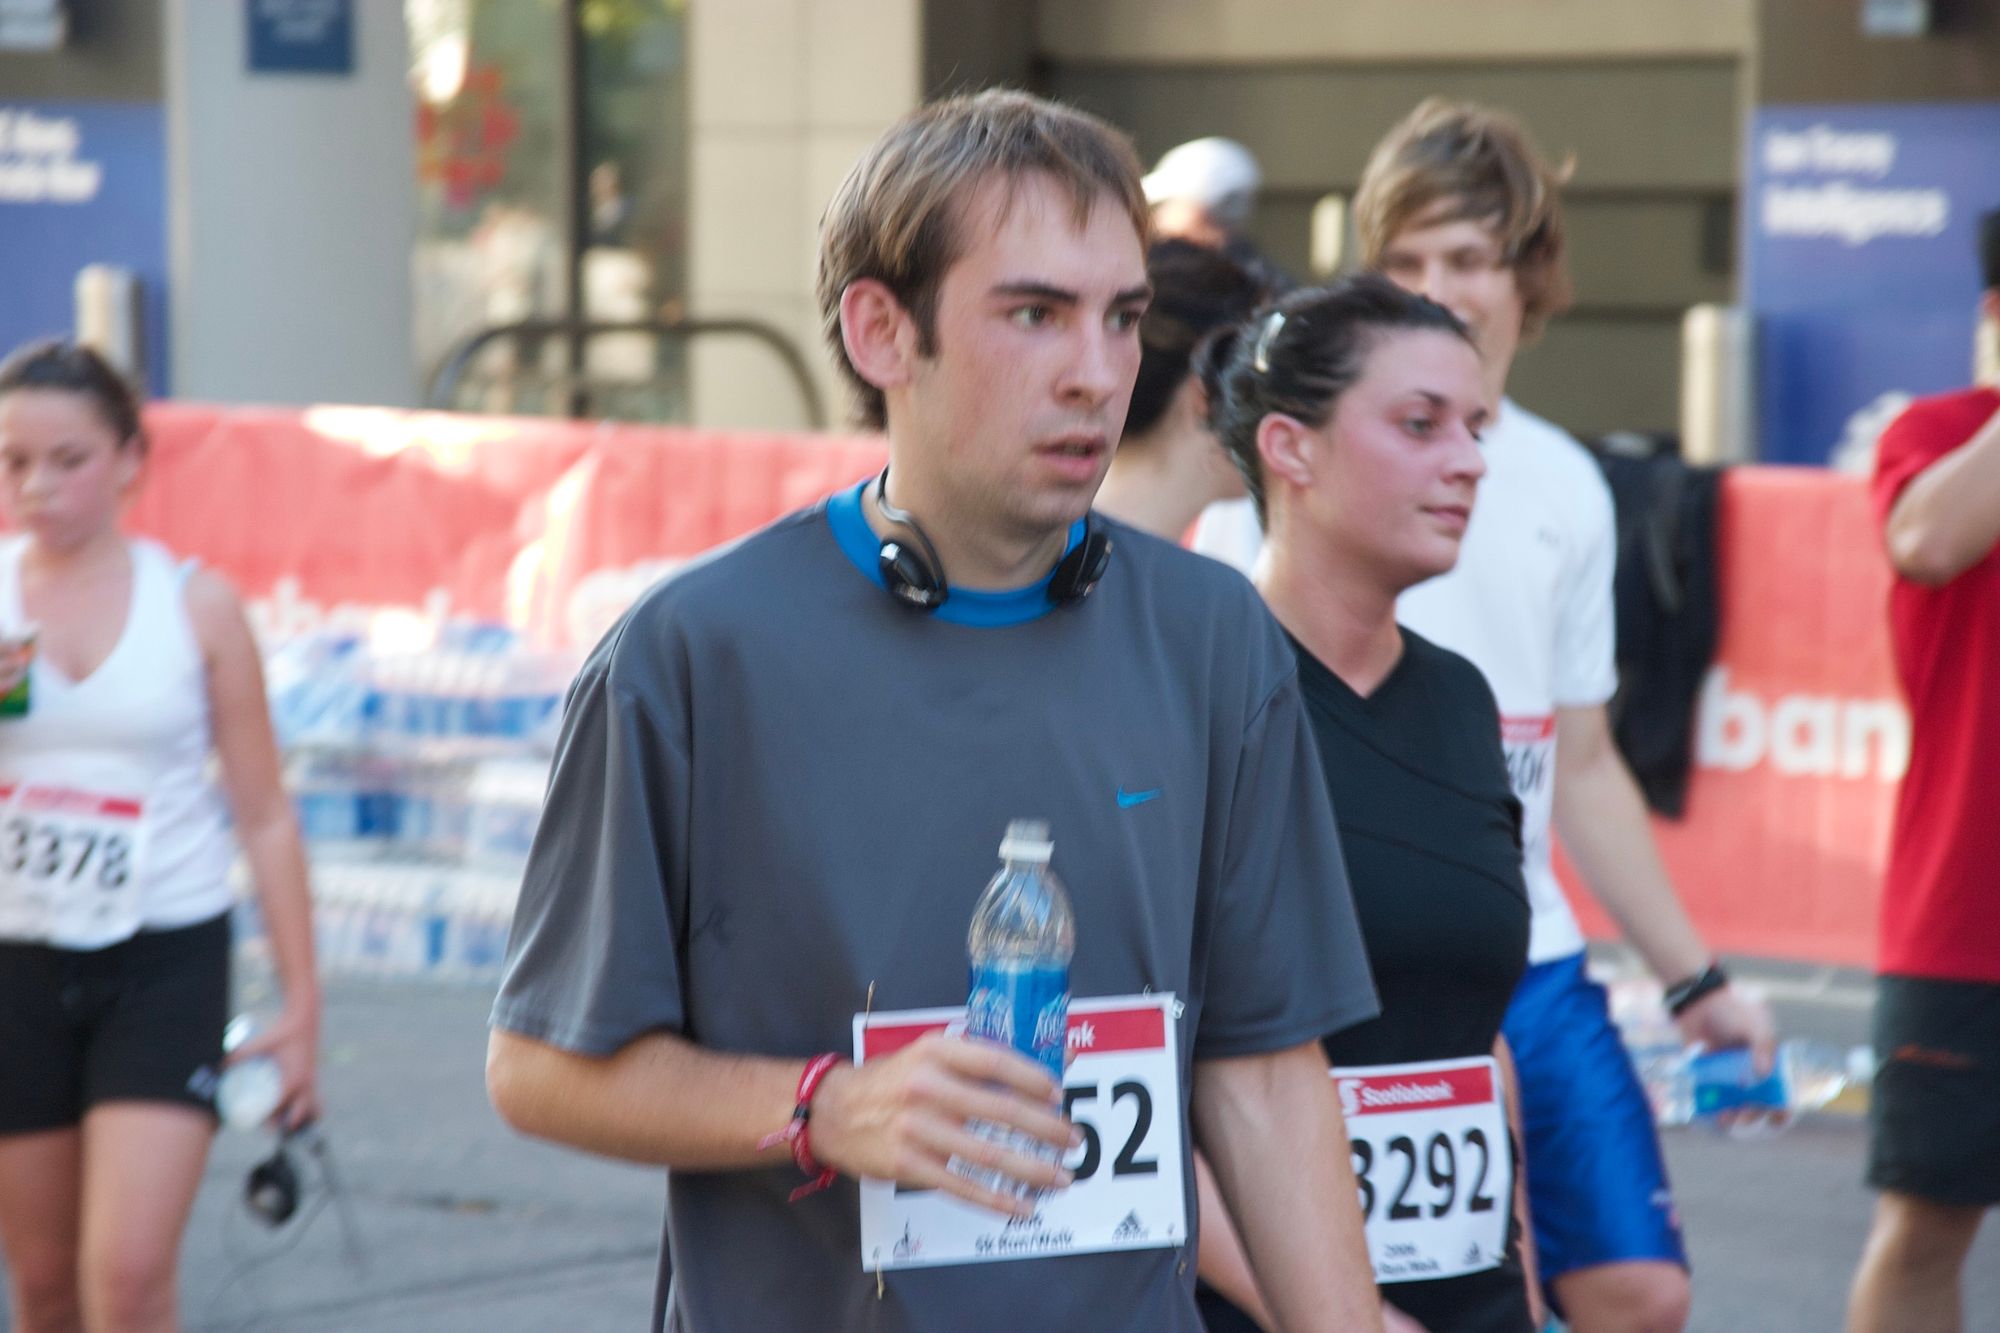 The author in 2006, post-5k race.